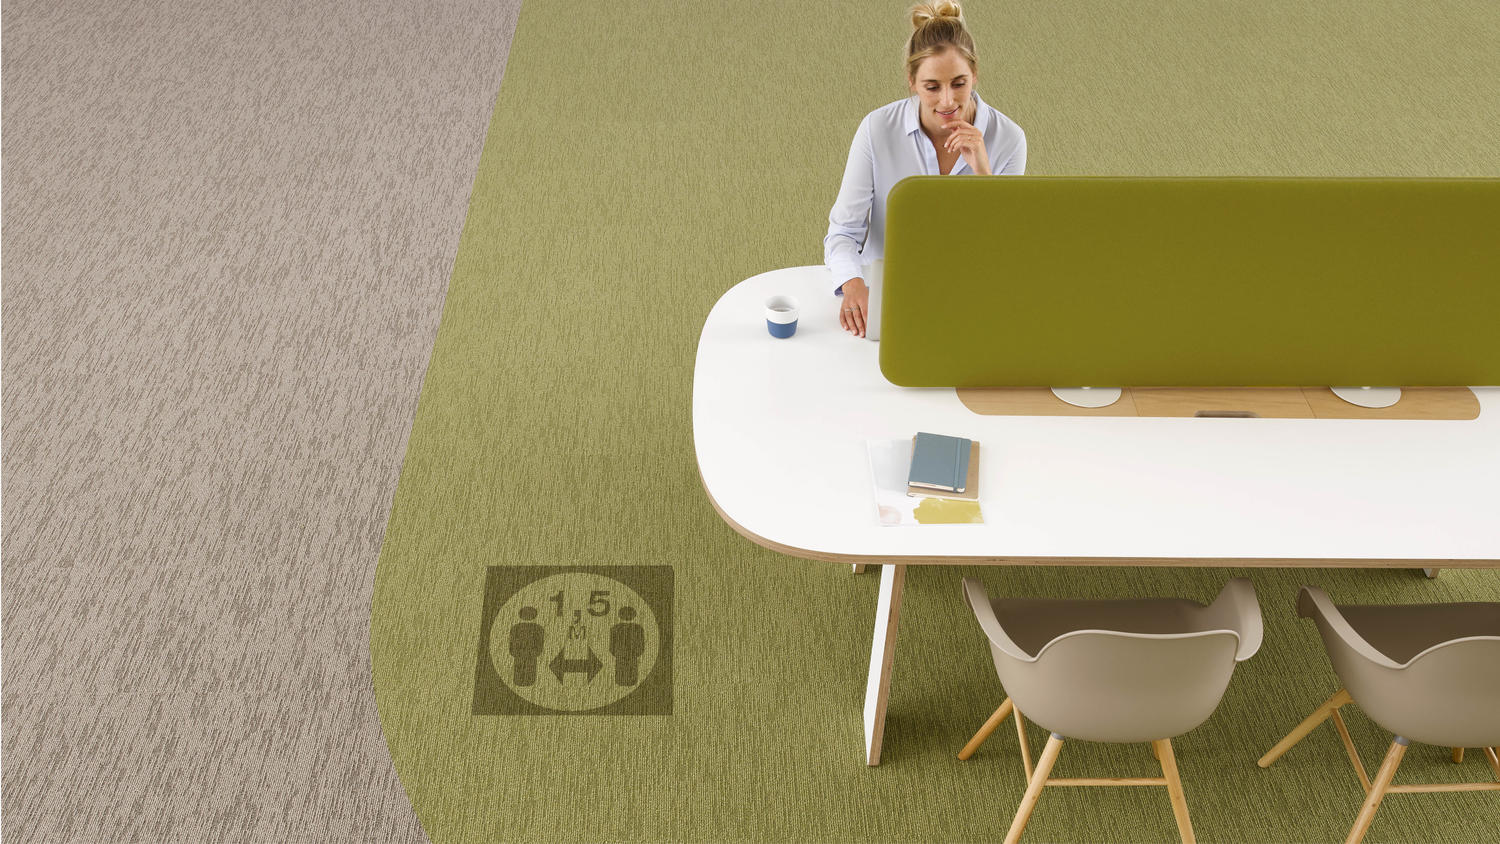 Airmaster Atmos carpet tiles installed in a workplace space